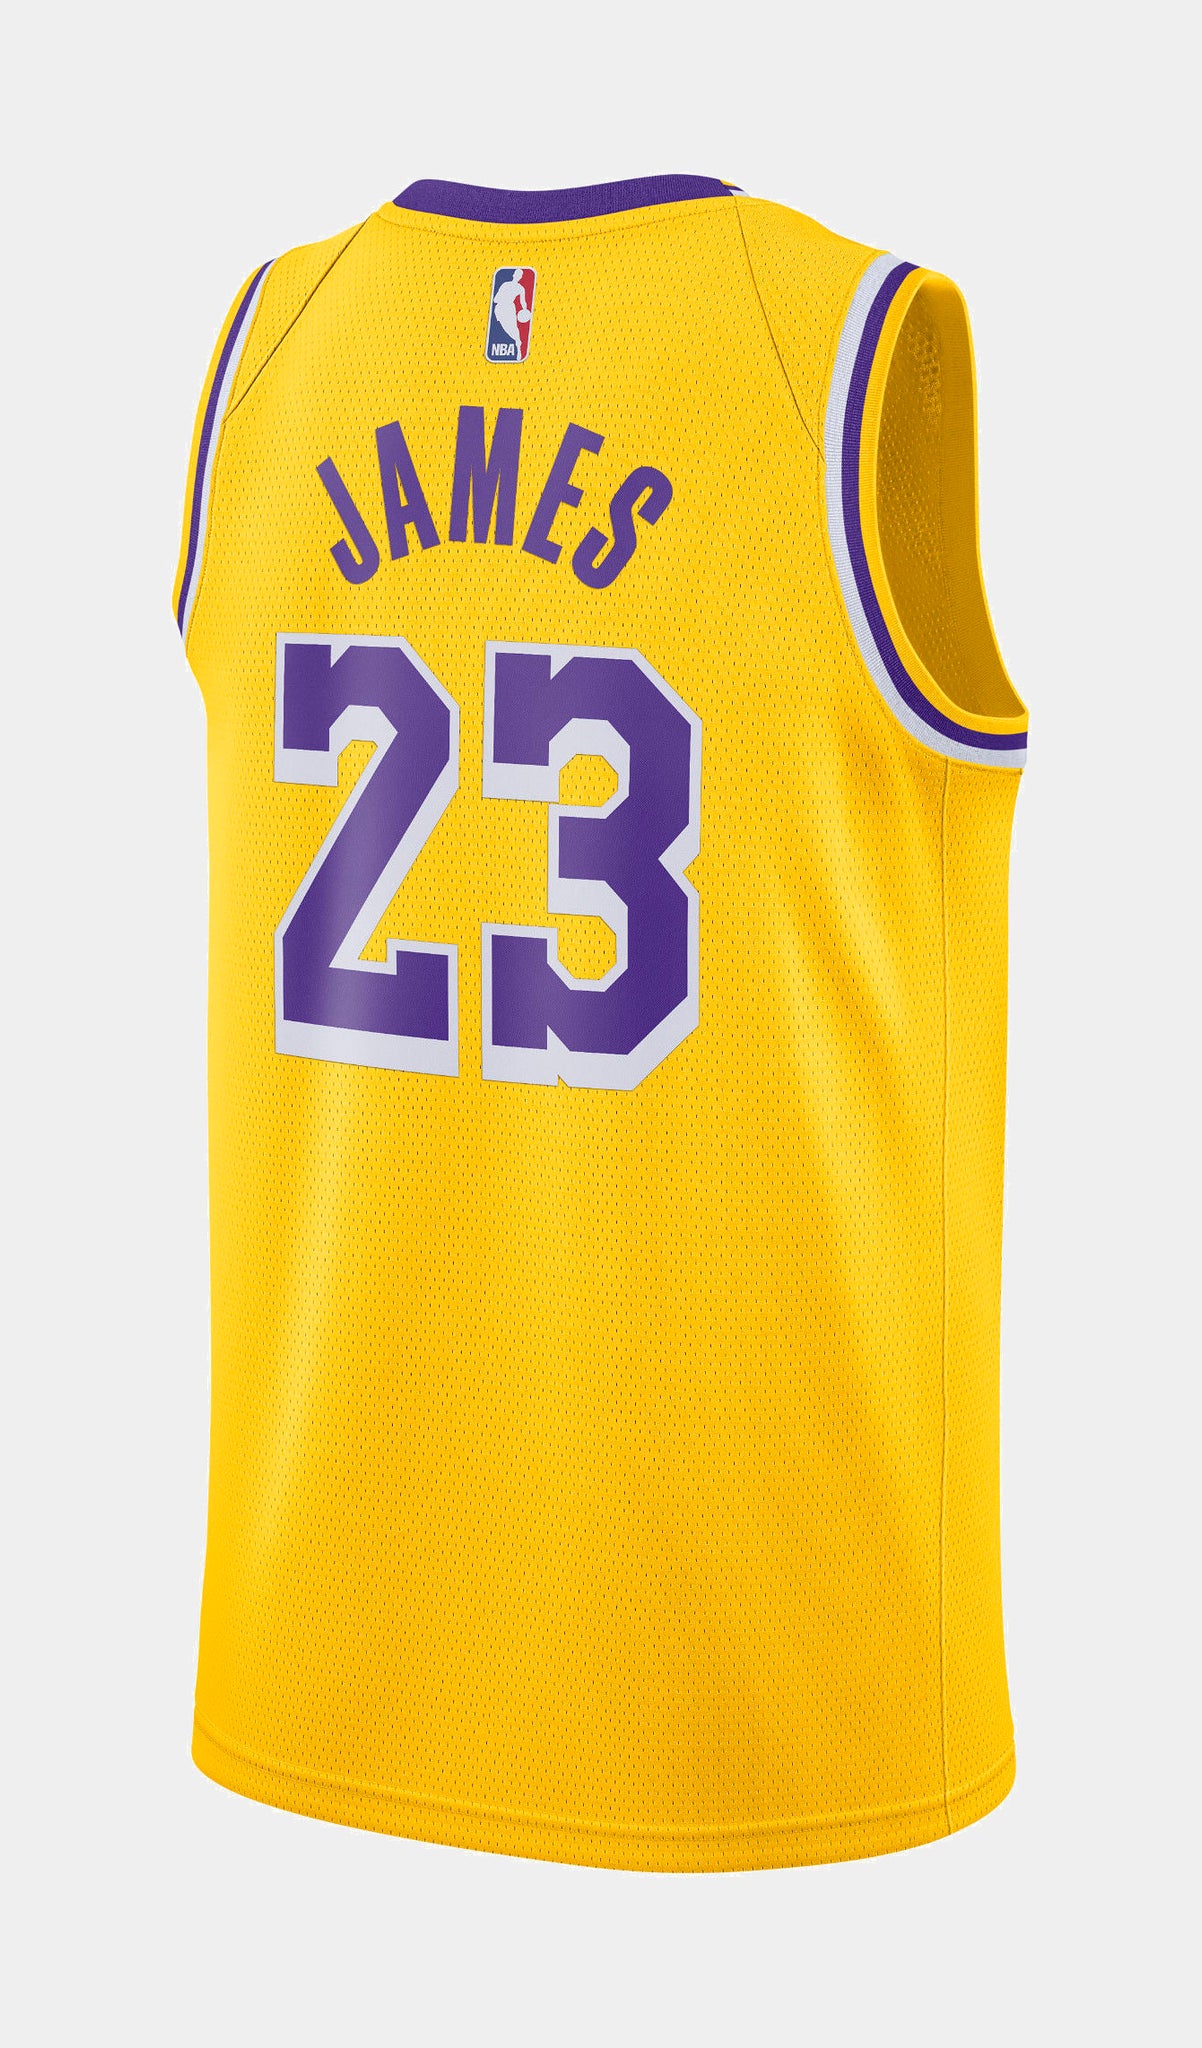 Los Angeles Lakers LeBron James NBA nike jersey youth large